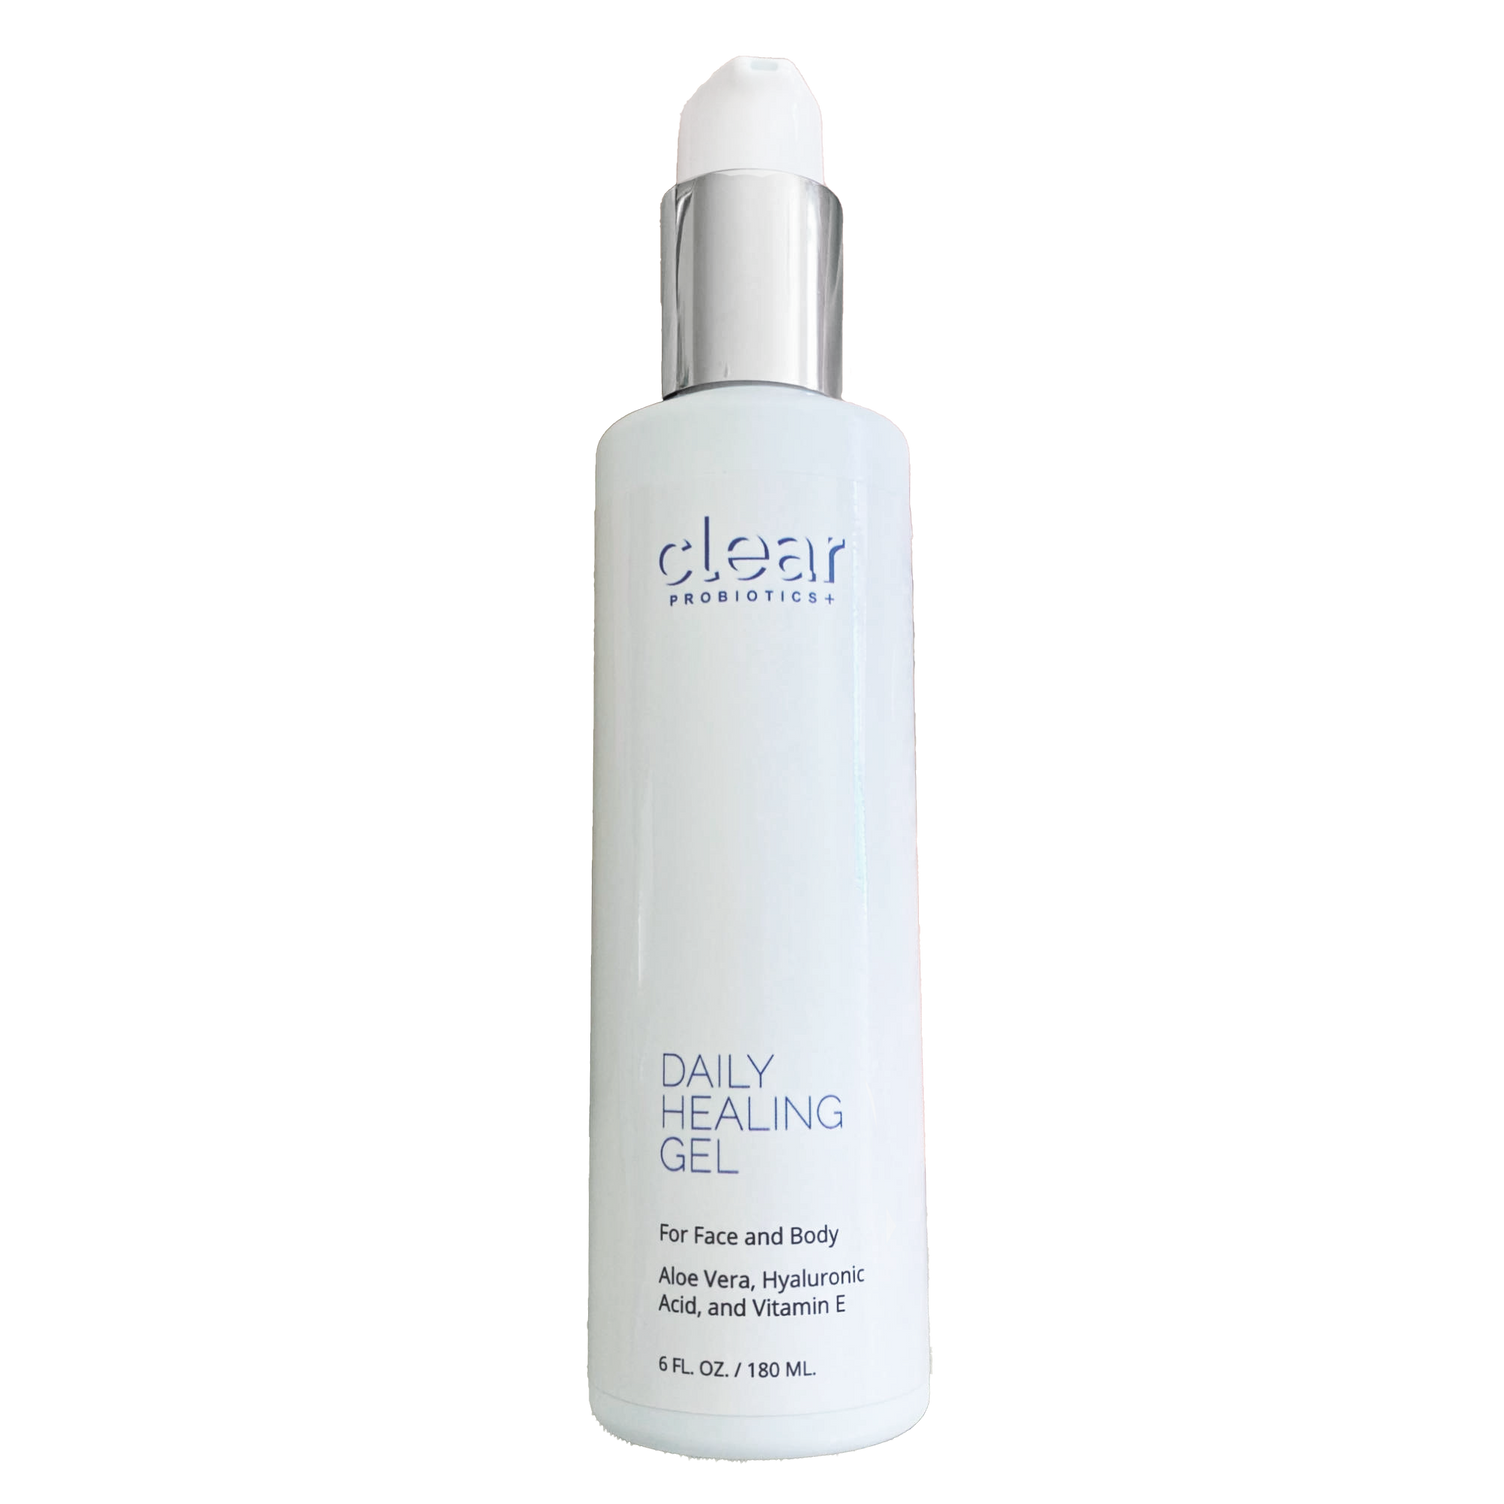 Clear Daily Healing Gel refreshes and repairs skin